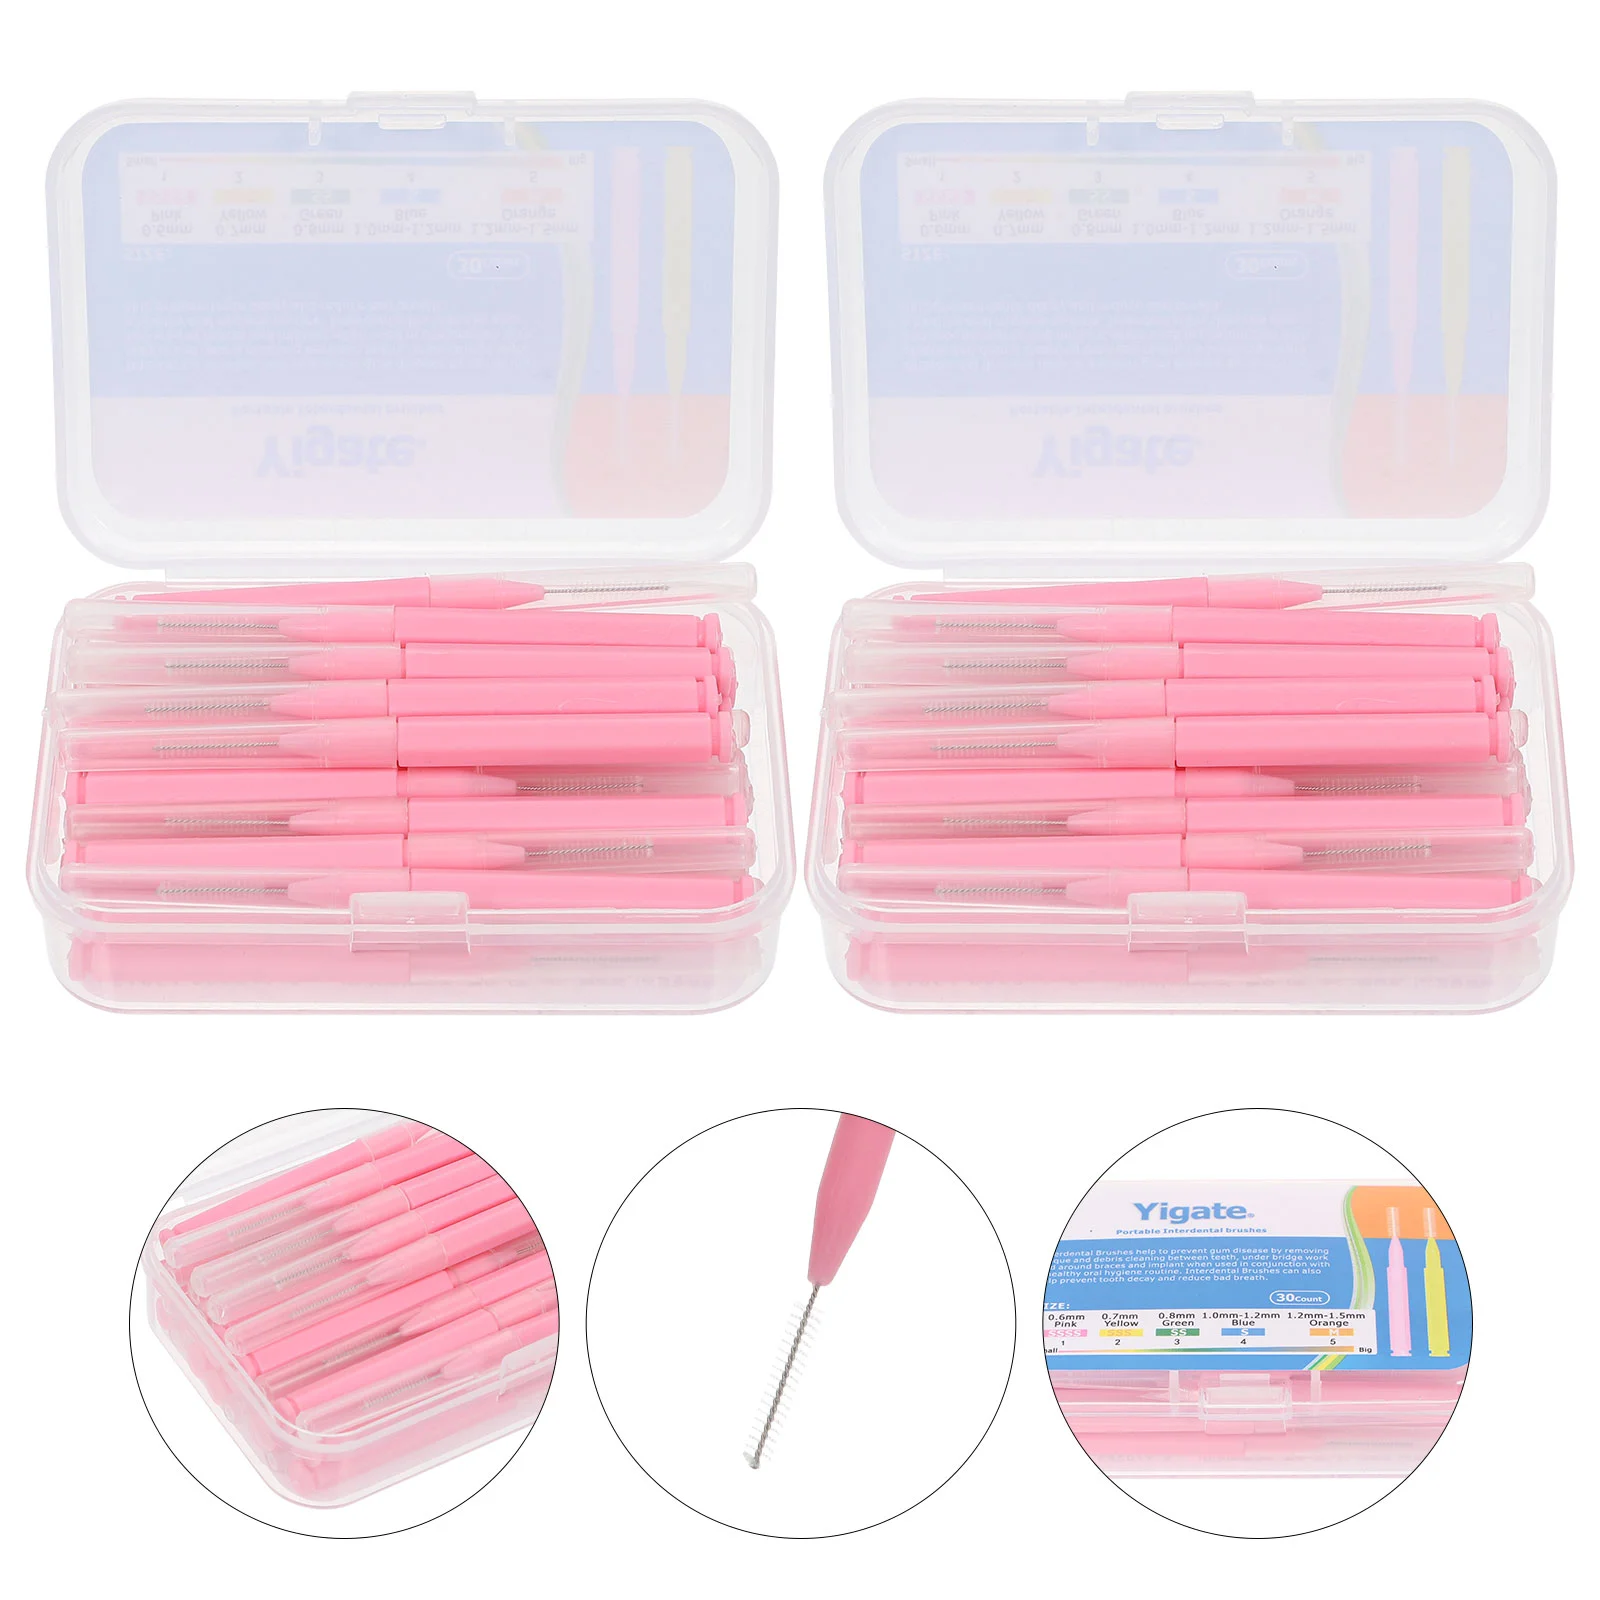 

60 Pcs Interdental Brush Toothpick Flosser Cleaning Teeth Adult Inter- Brushes Picks Kids Oral Care Tool